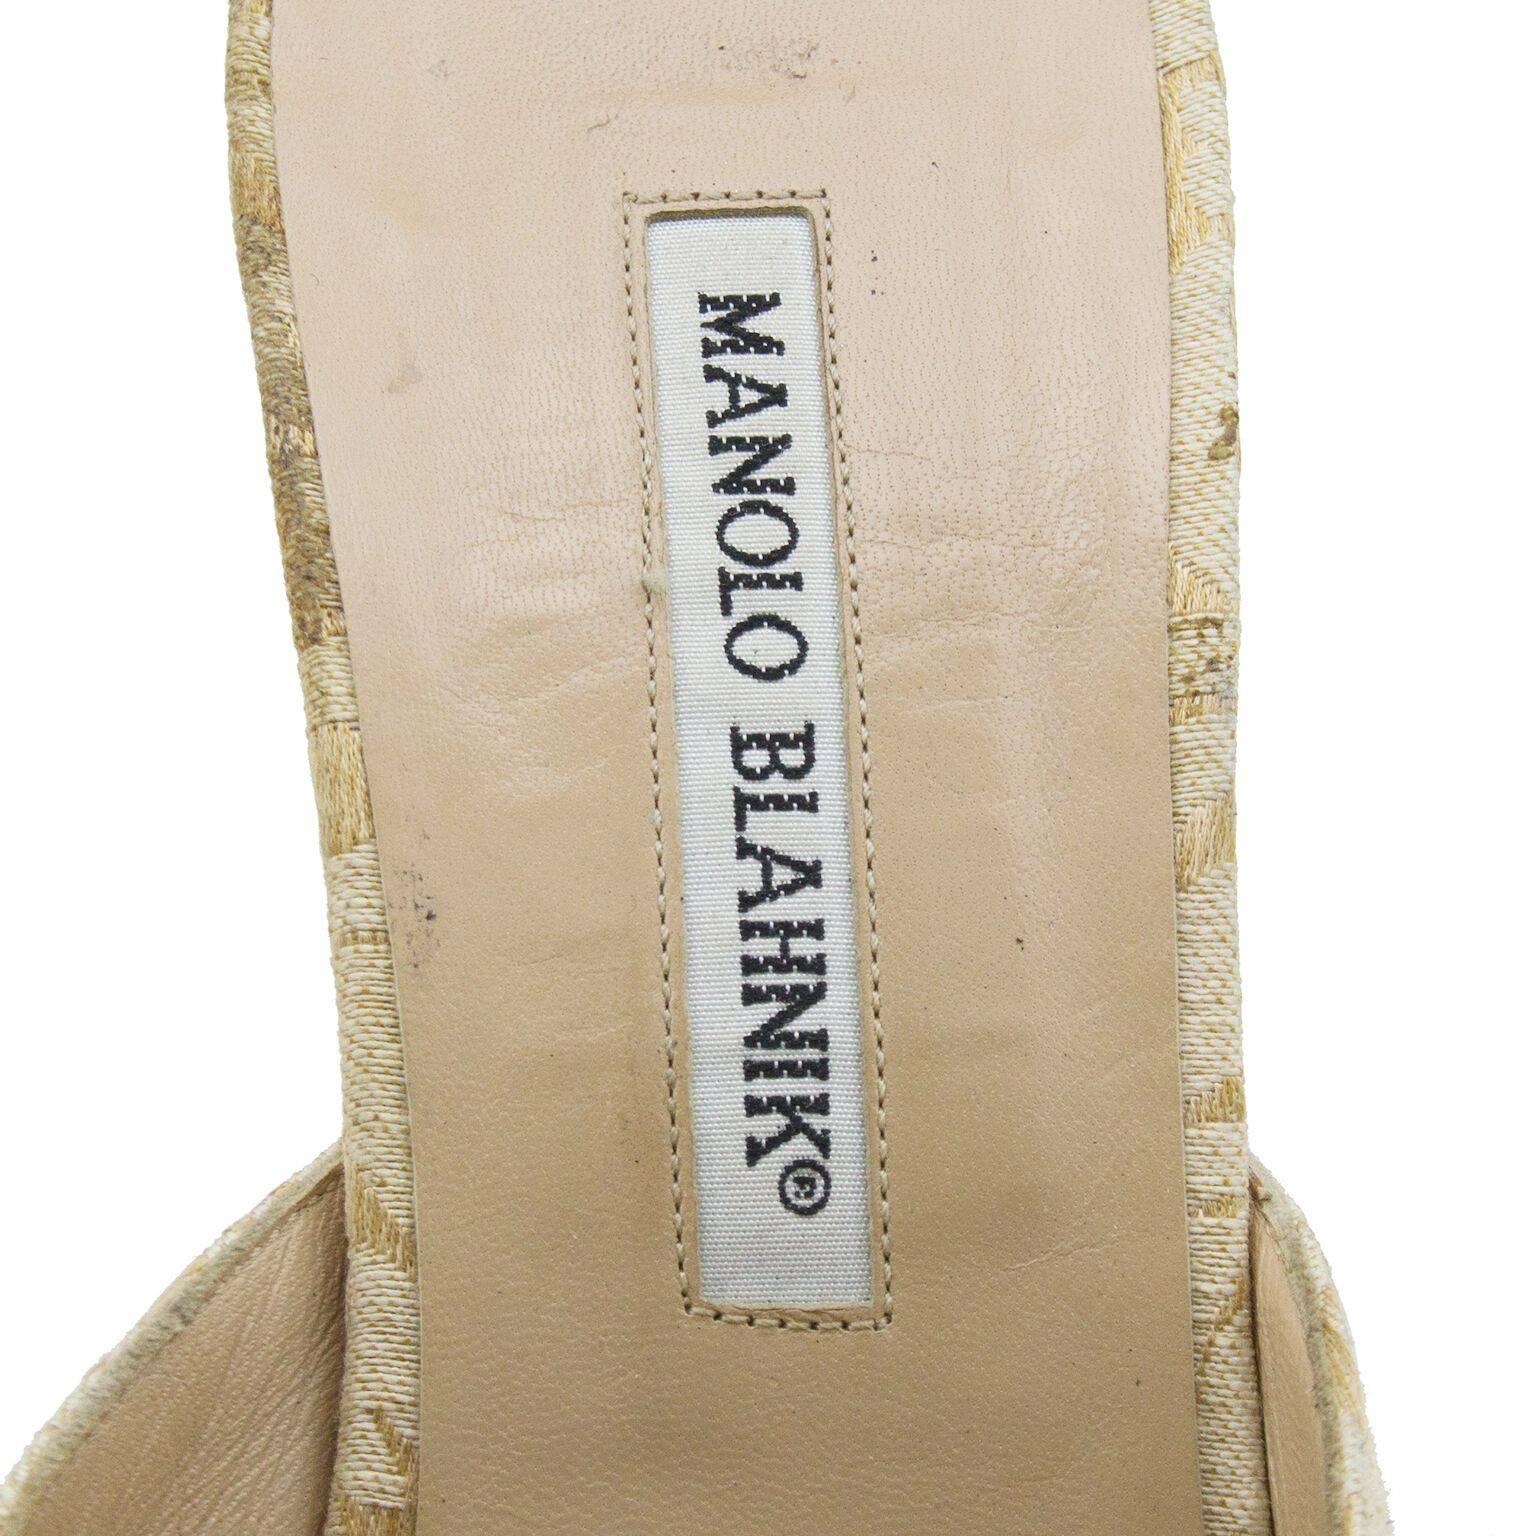 Beige 1990s Manolo Blanhik High Heel Mules with Mother of Pearl Details 